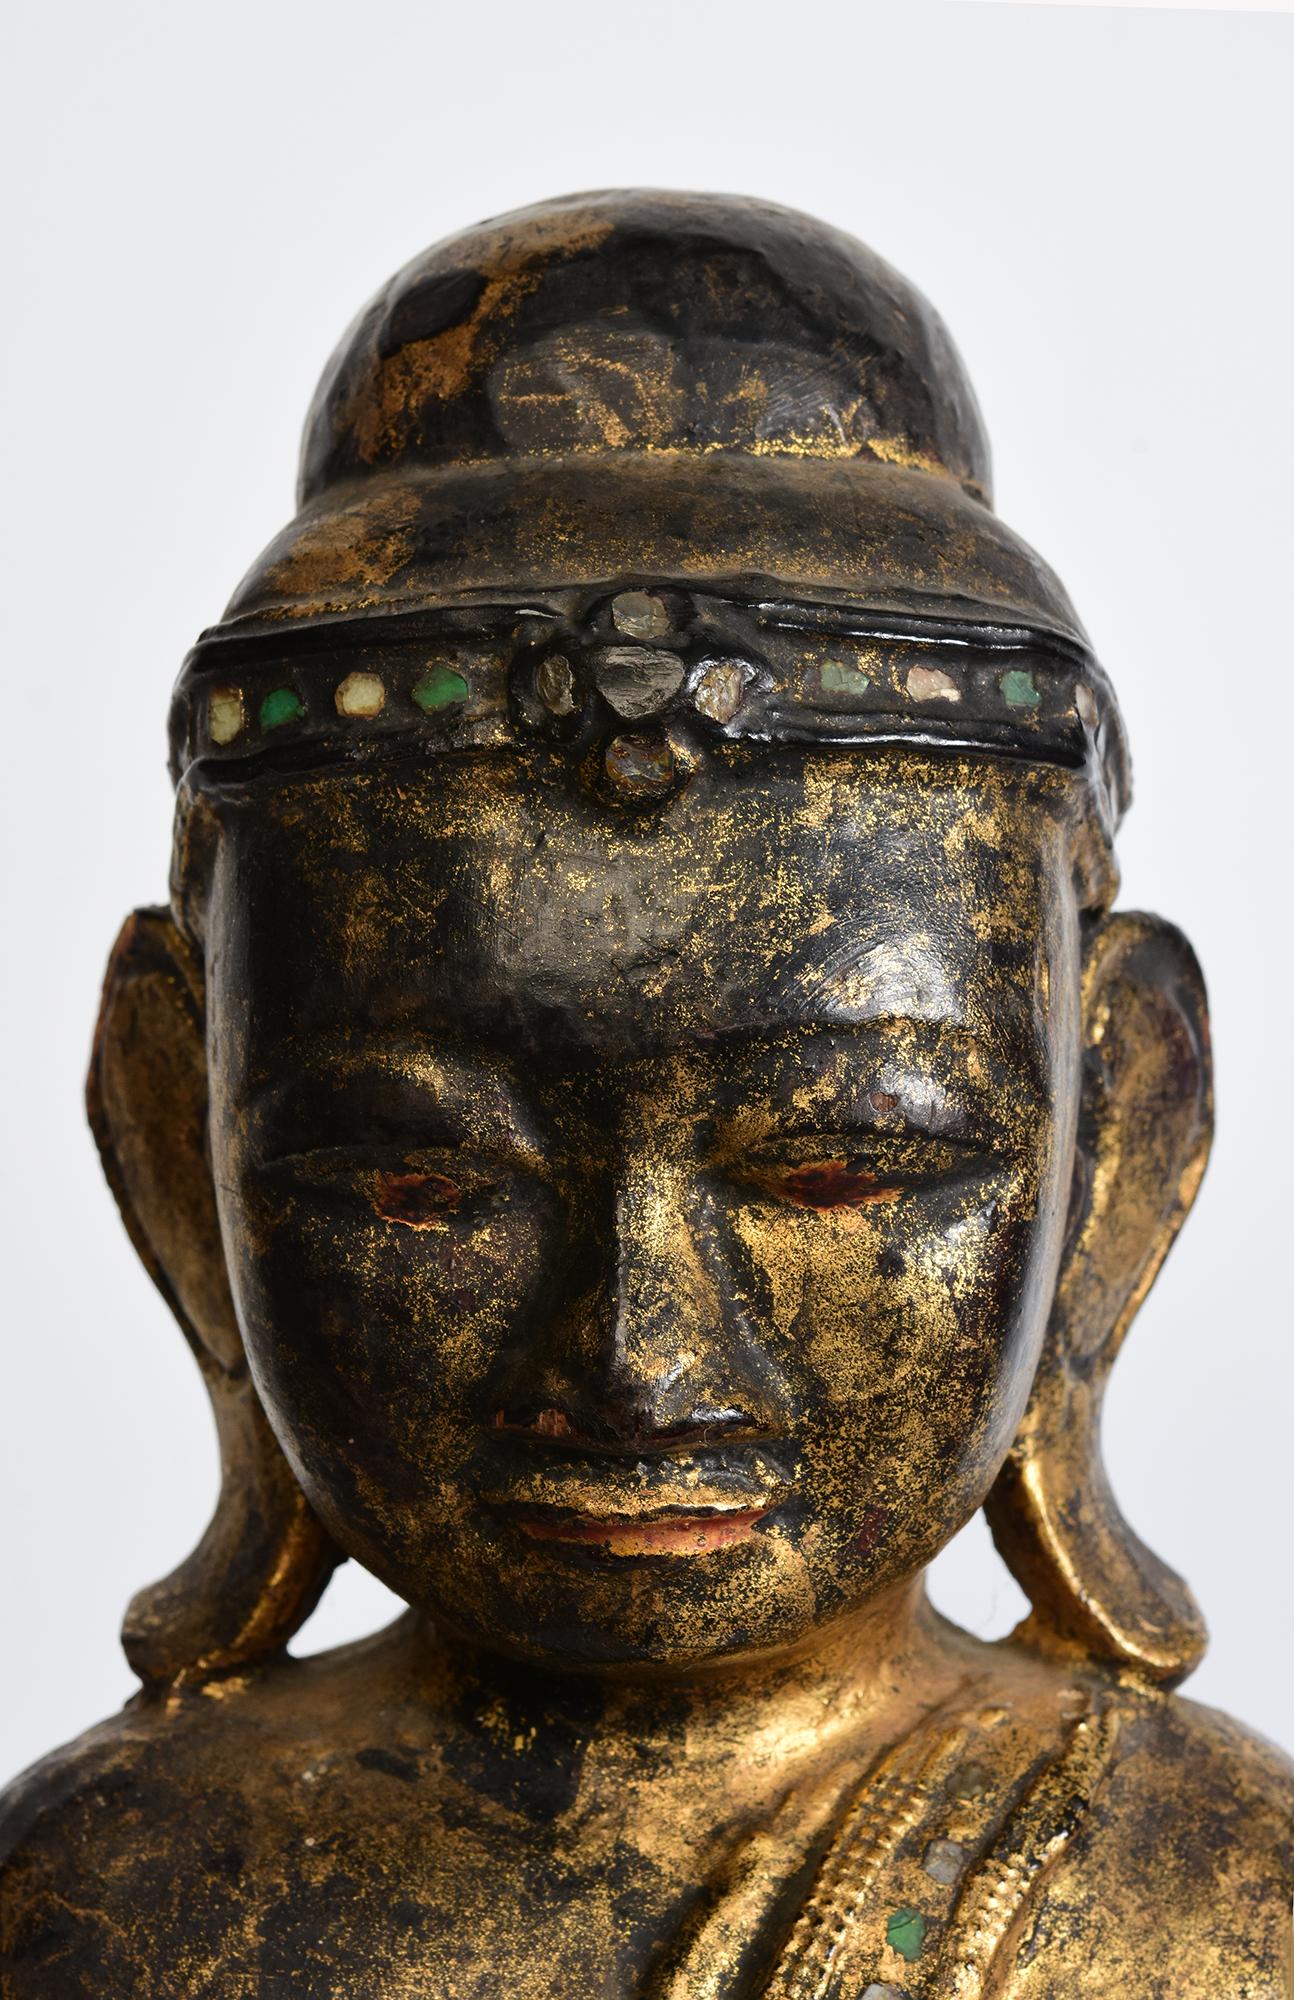 Antique Burmese wooden Buddha standing on a lotus pedestal, with lacquered, gilding and inlay of colorful glass pieces on the headband and borders of the robe. 

Age: Burma, Mandalay Period, 19th Century
Size of Buddha only: Height 58.3 C.M. / Width